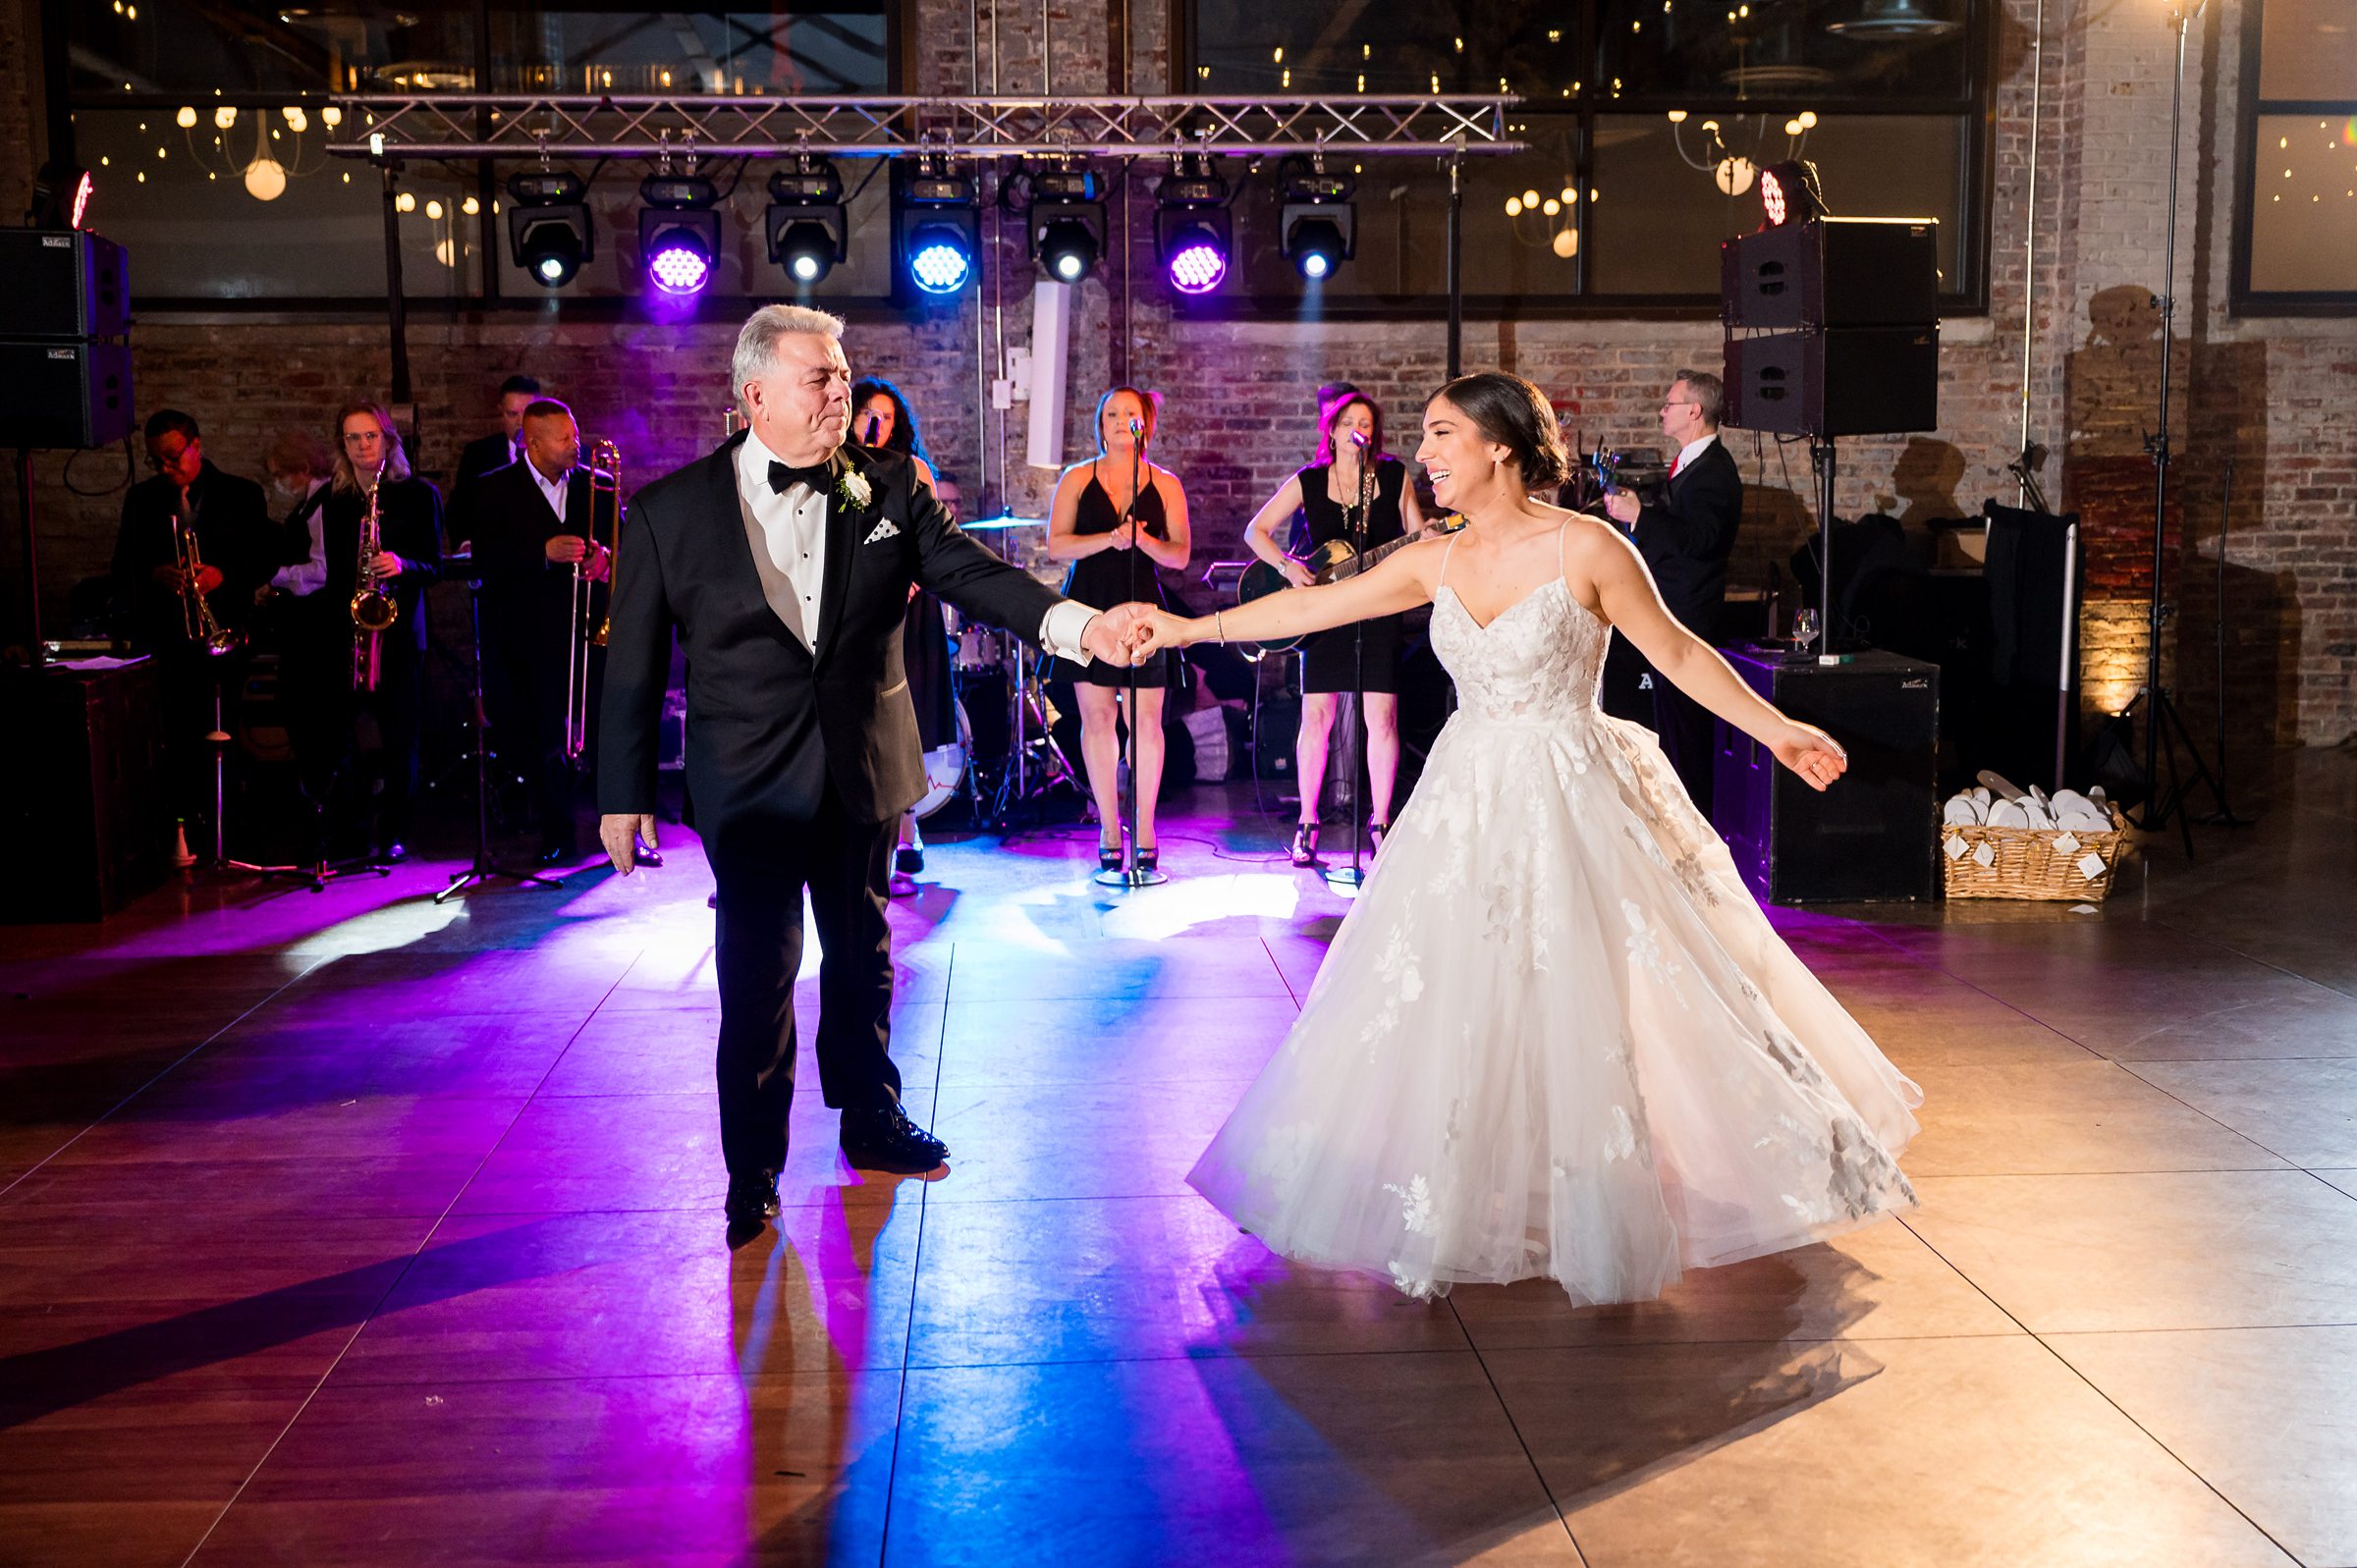 At a Lilah wedding event, the bride and groom are gracefully dancing at their reception.